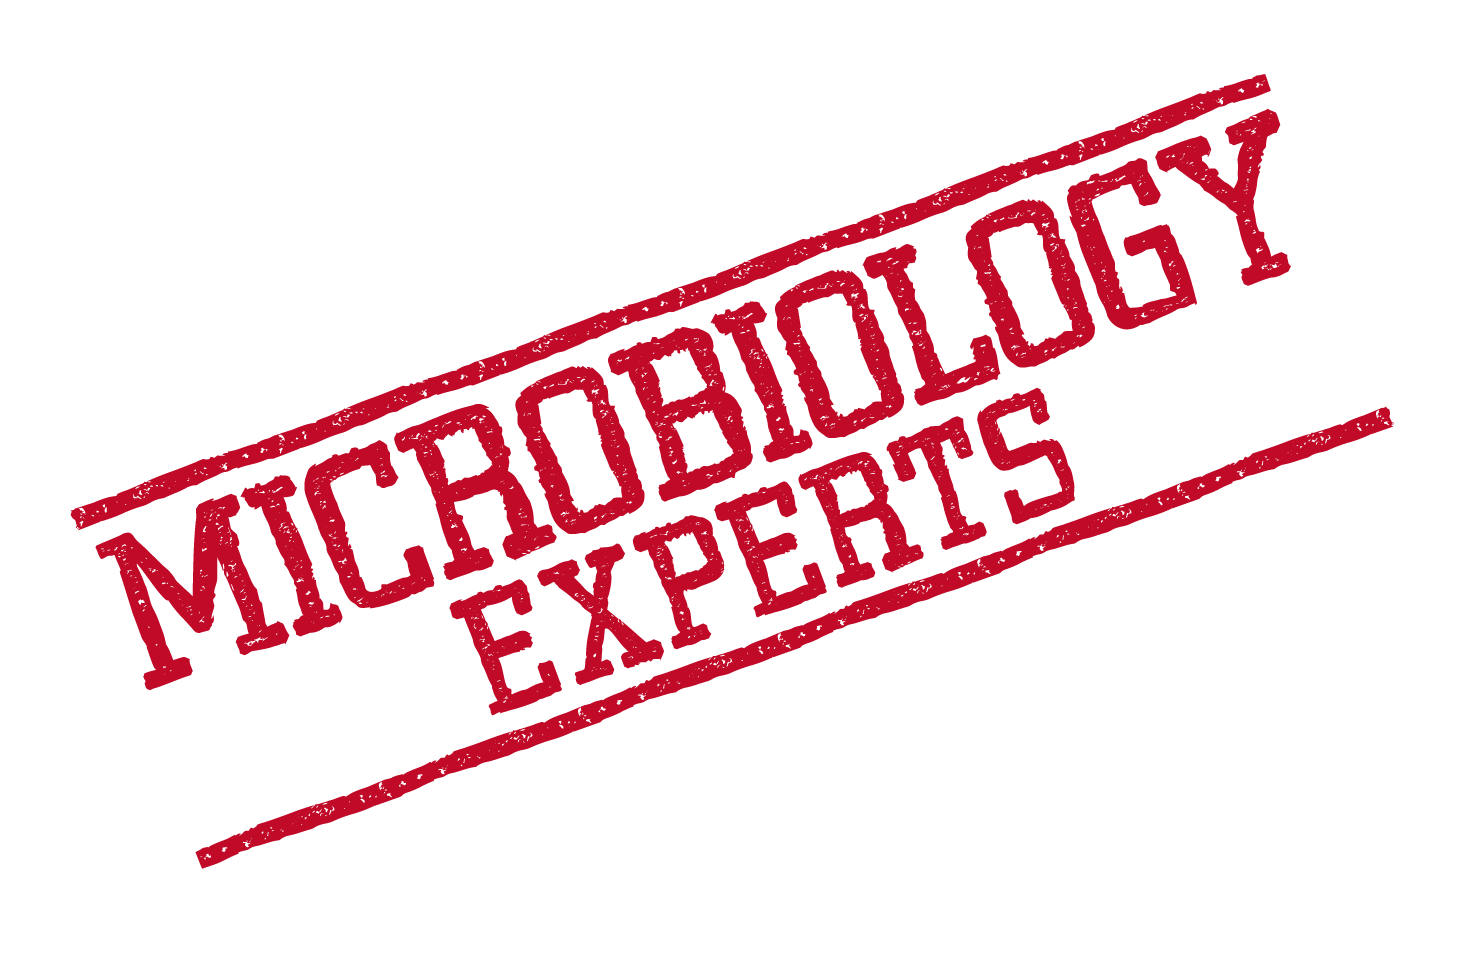 microbiology experts